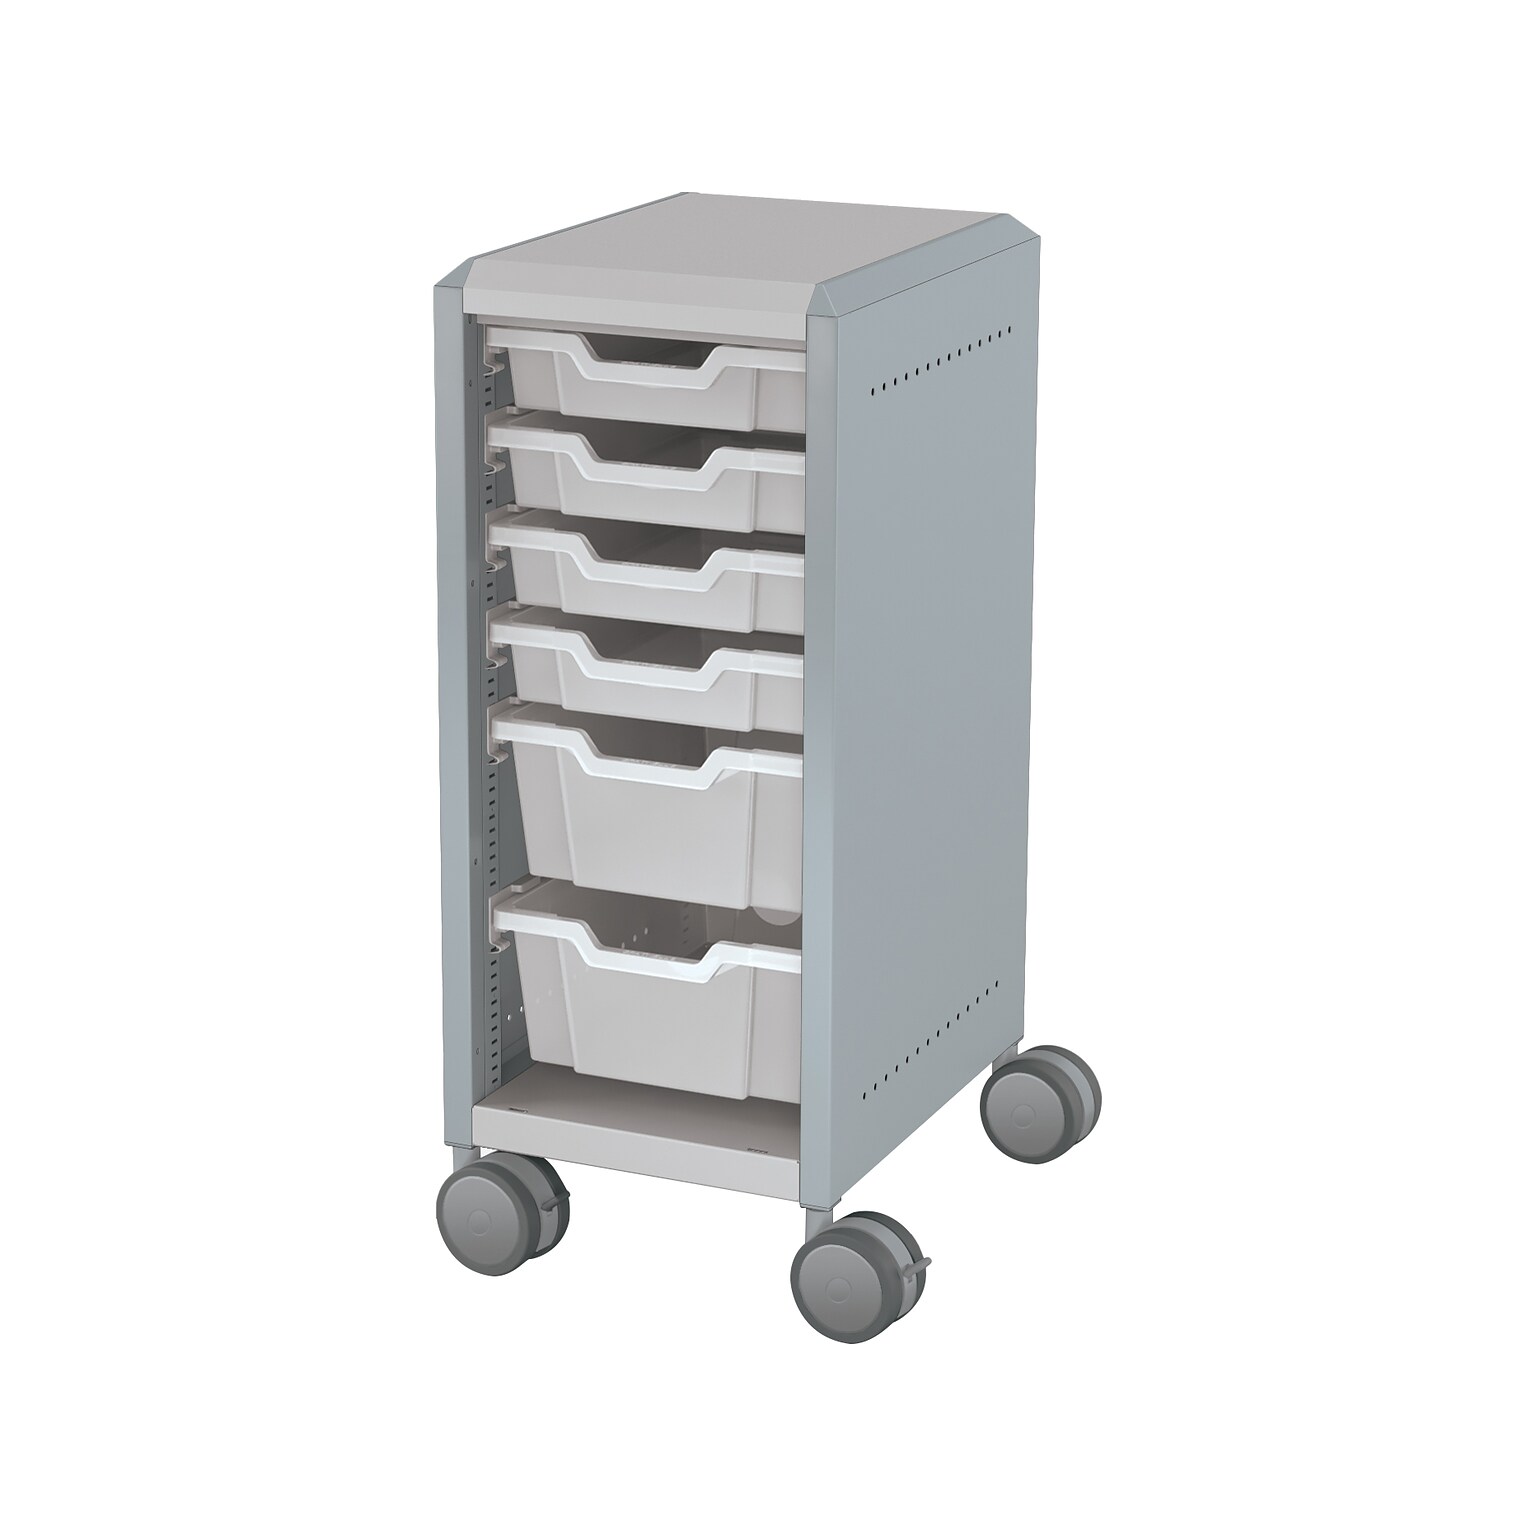 MooreCo Compass Mini H2 Mobile 6-Section Storage Cabinet, 36.13H x 14.88W x 19.13D, Platinum/Cool Gray Metal (B1A1B1C1X0)